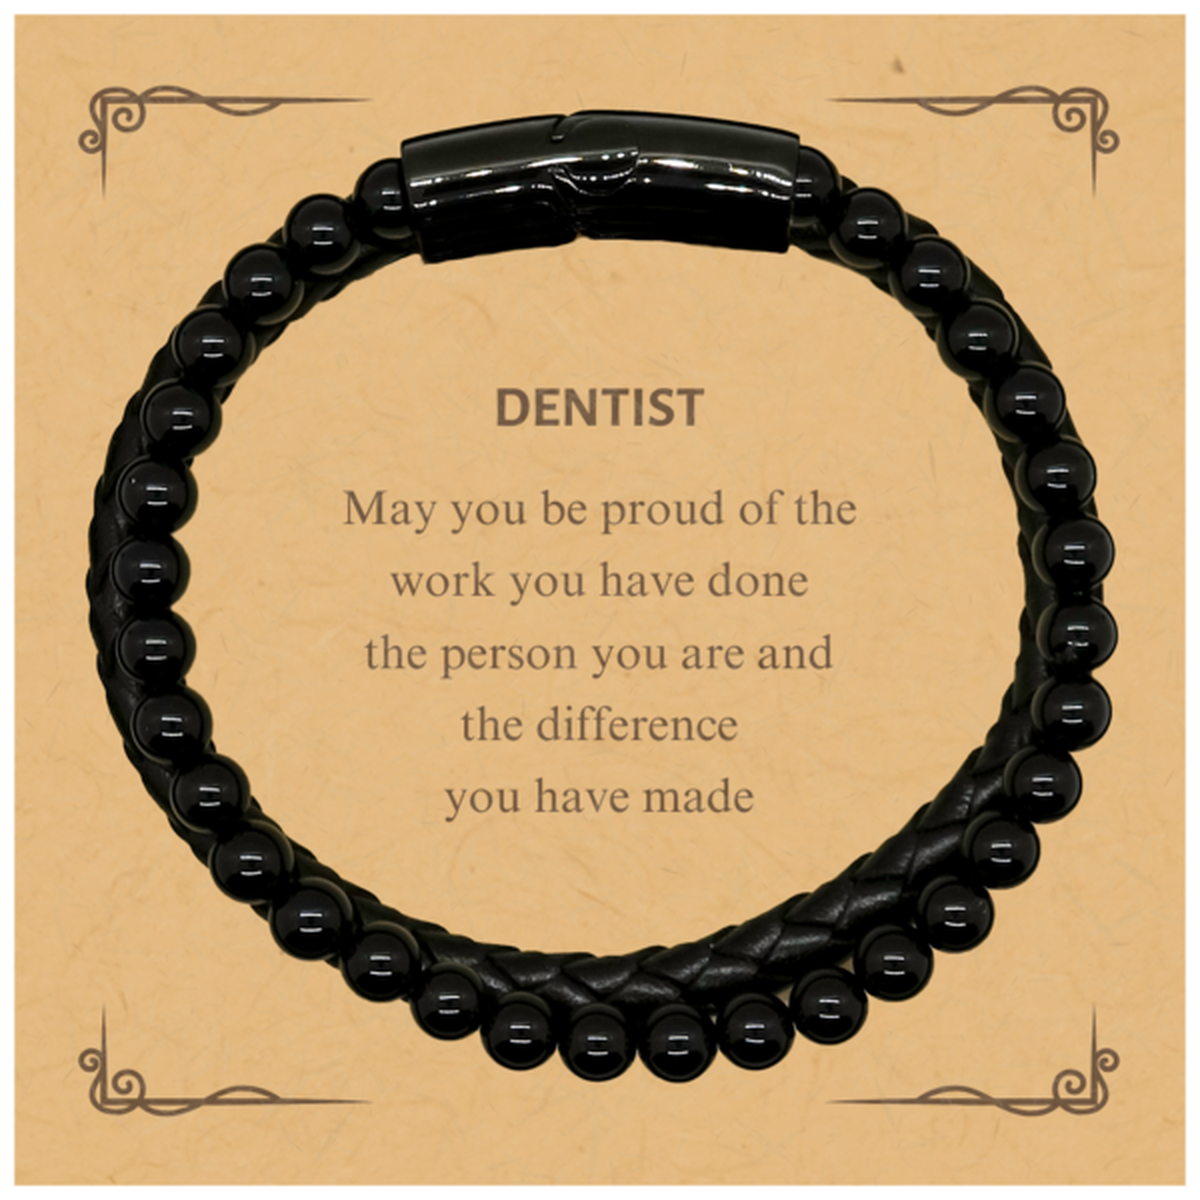 Dentist May you be proud of the work you have done, Retirement Dentist Stone Leather Bracelets for Colleague Appreciation Gifts Amazing for Dentist